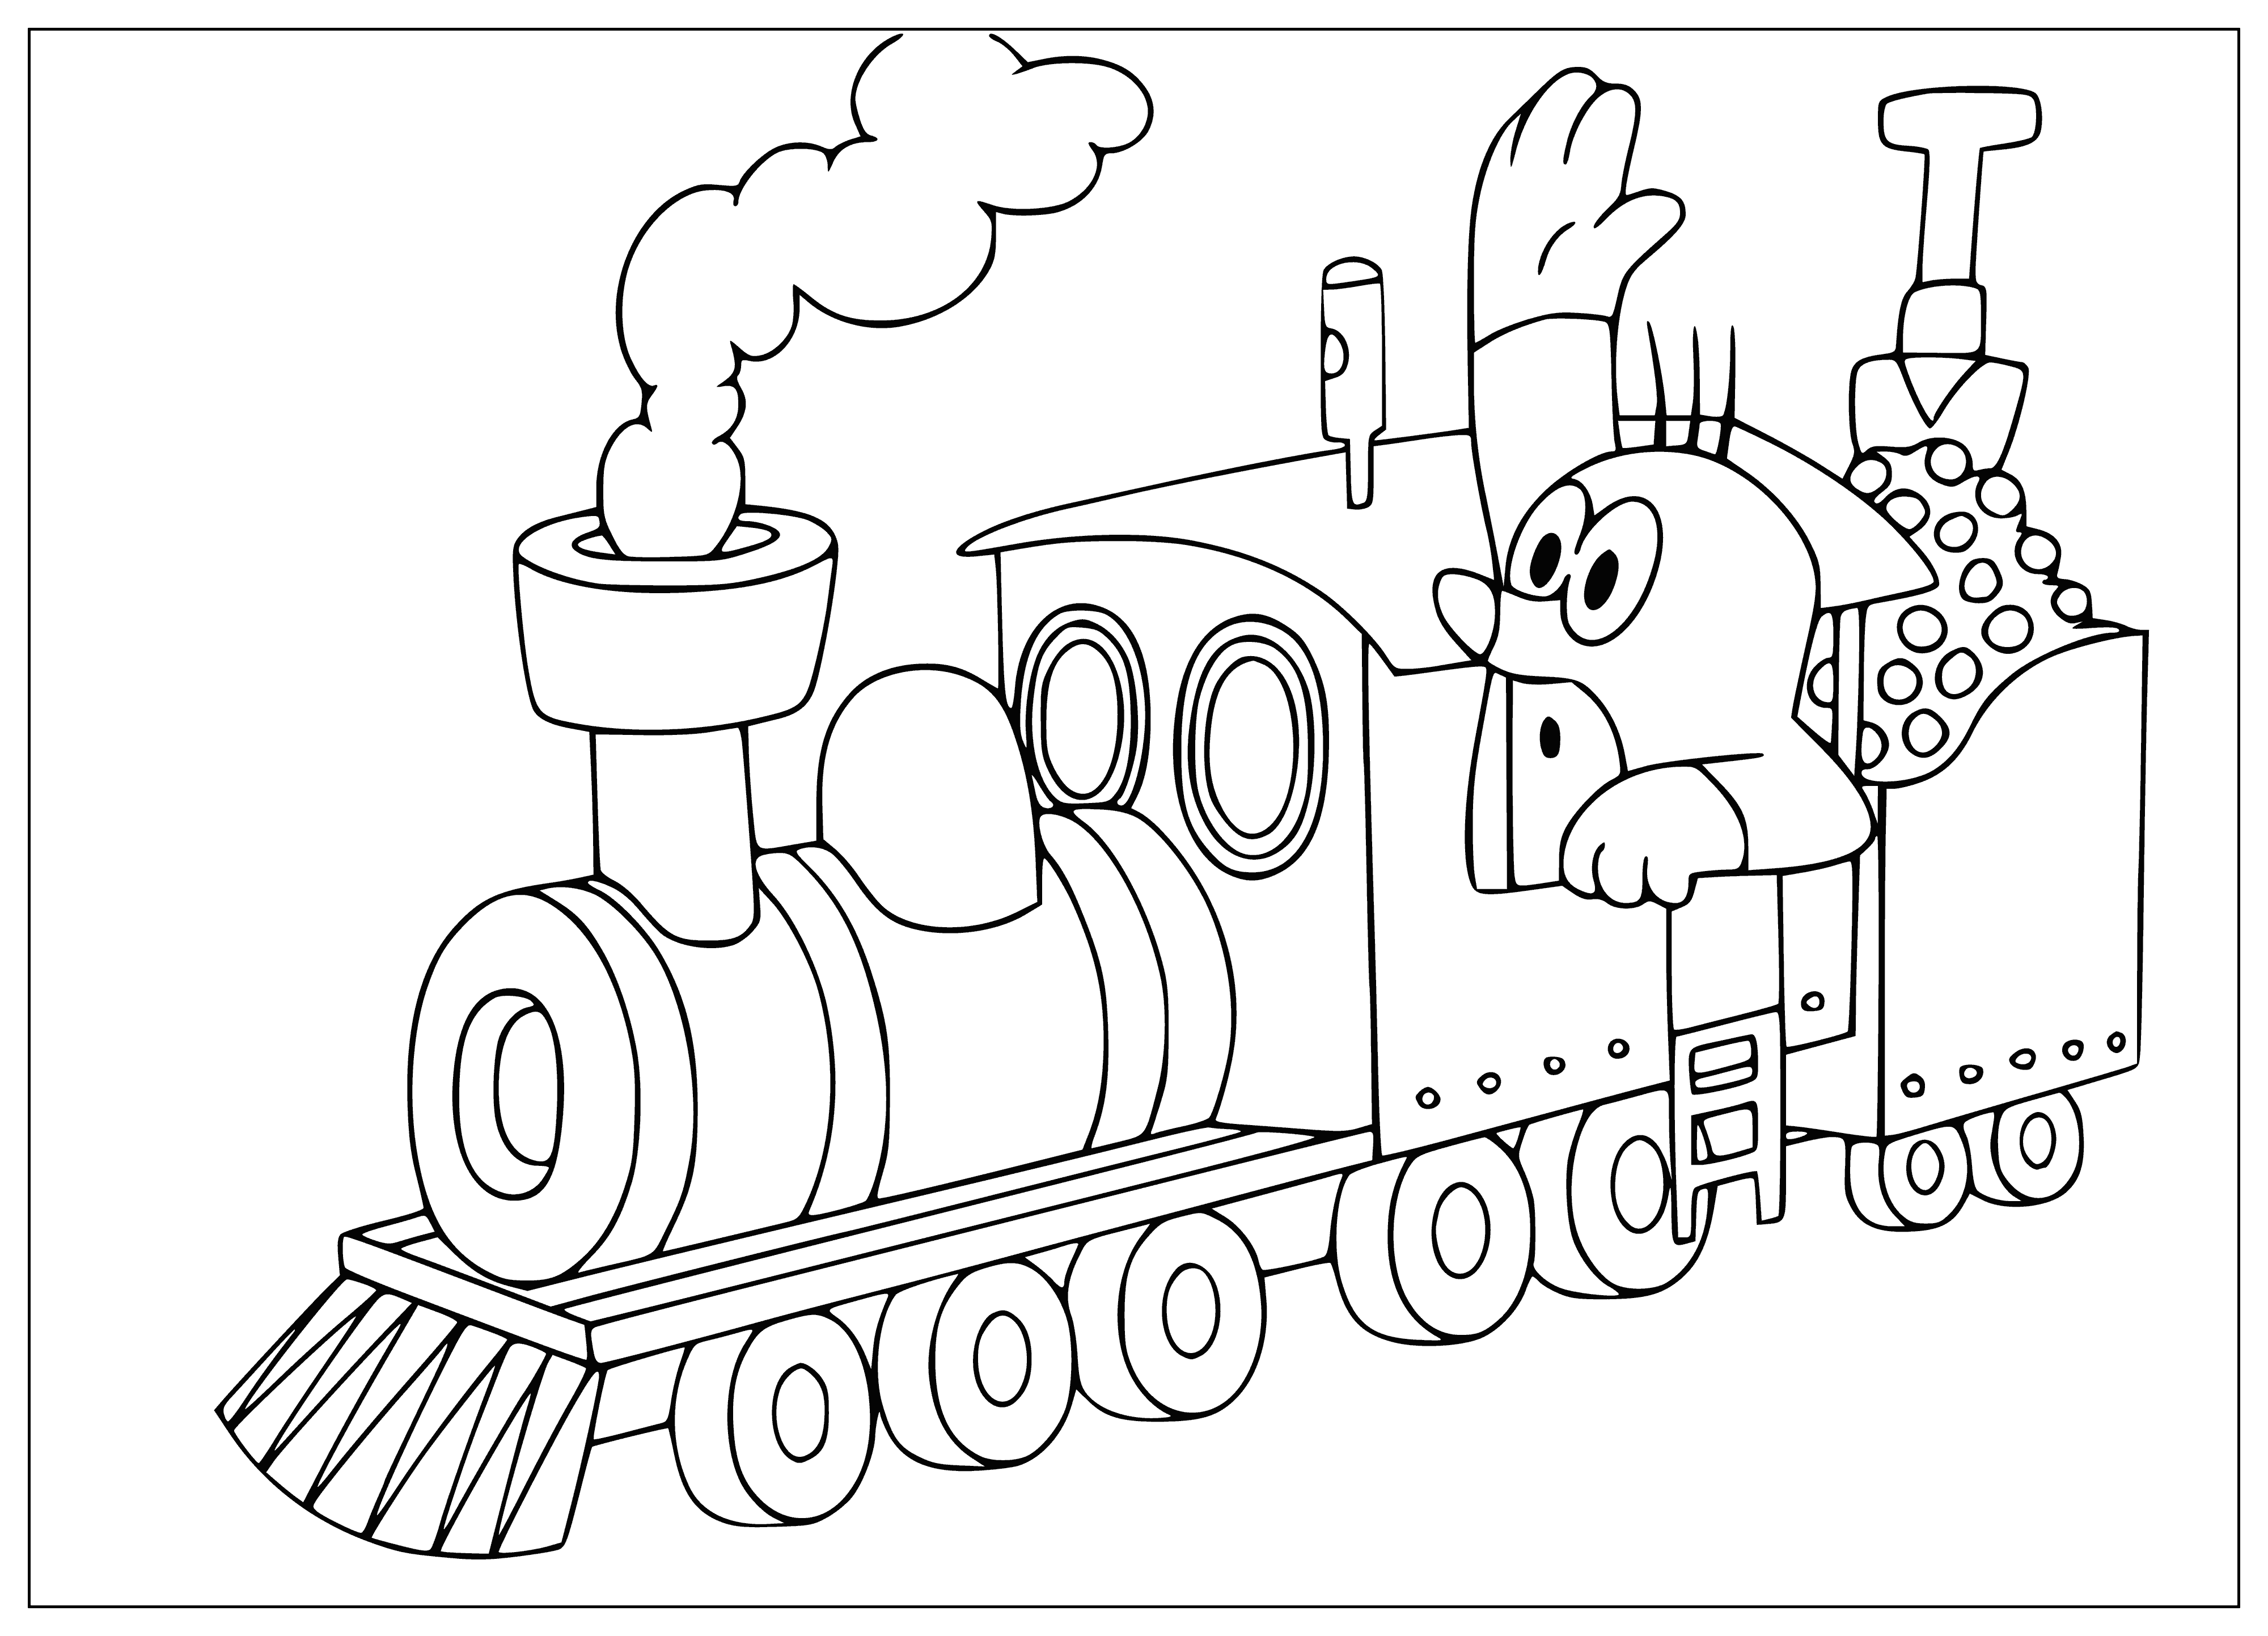 coloring page: Mole is pulling steam locomotive with lots of wheels in coloring page. #coloringpages #coloring #steamlocomotive